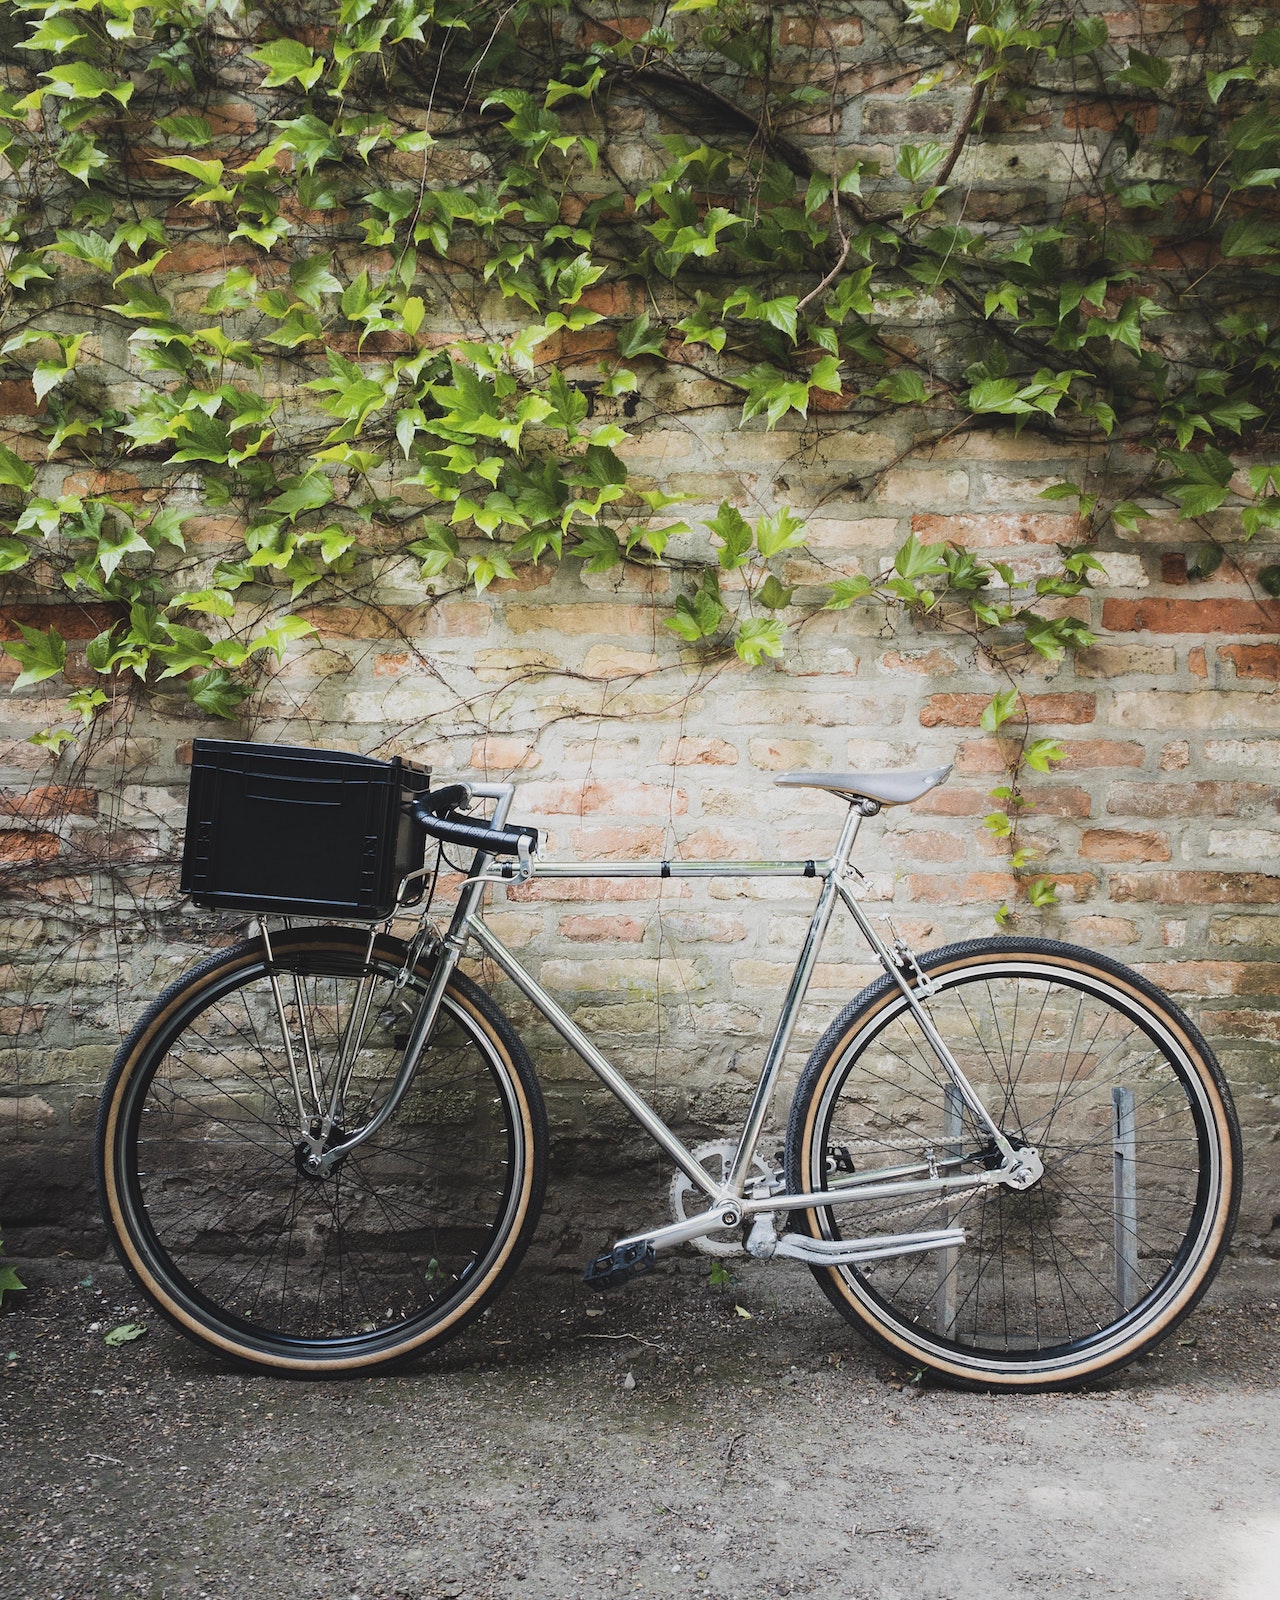 Picture of bike by Andreas Haimerl on Unsplash